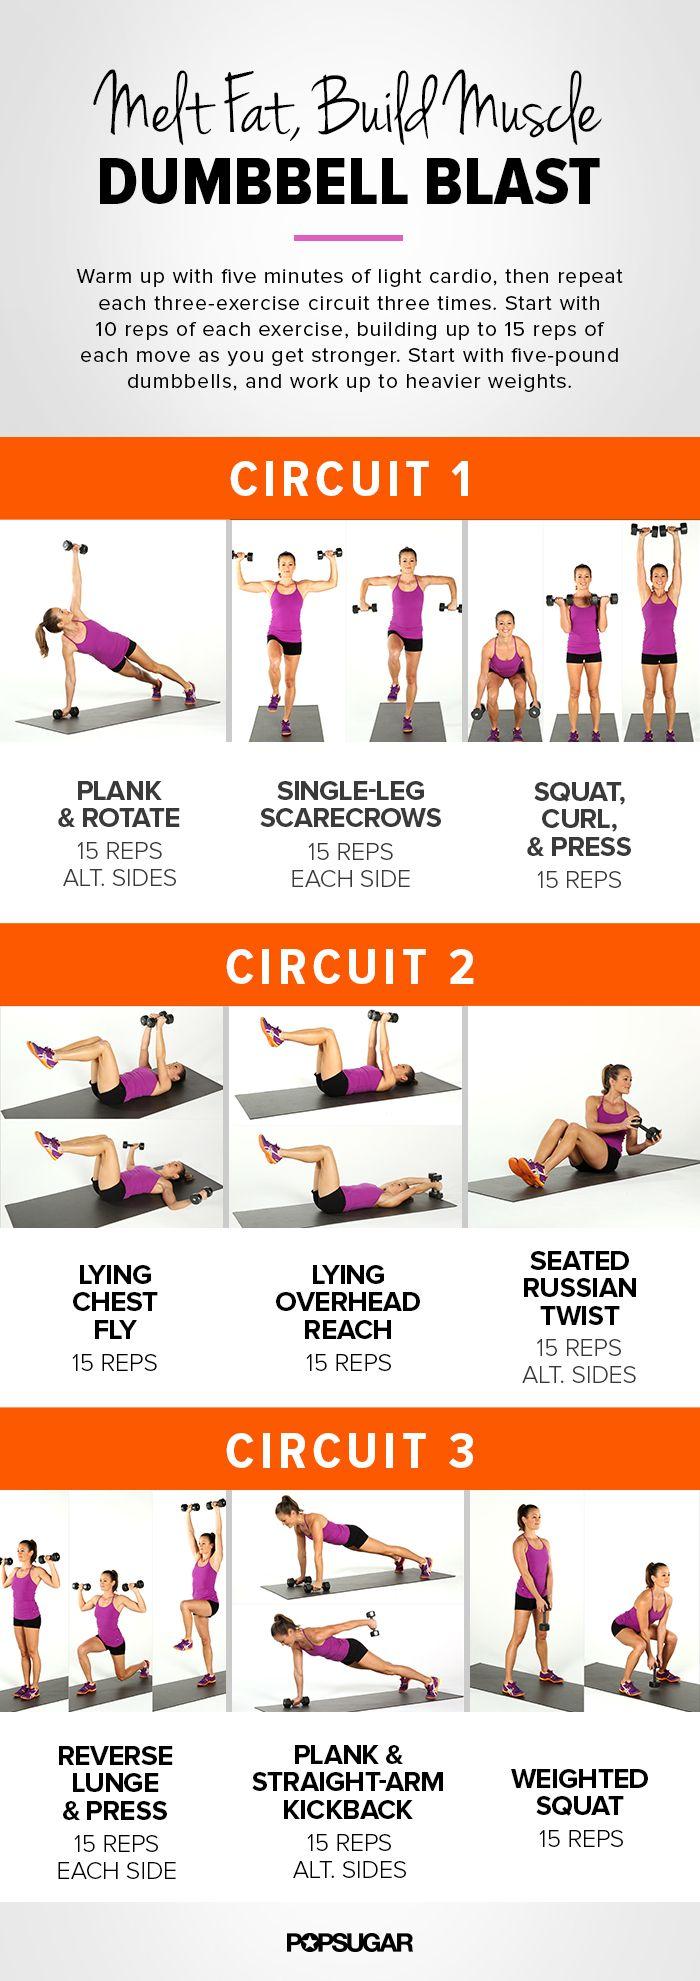 Hochzeit - Melt Fat And Build Muscle: Printable Workout With Weights